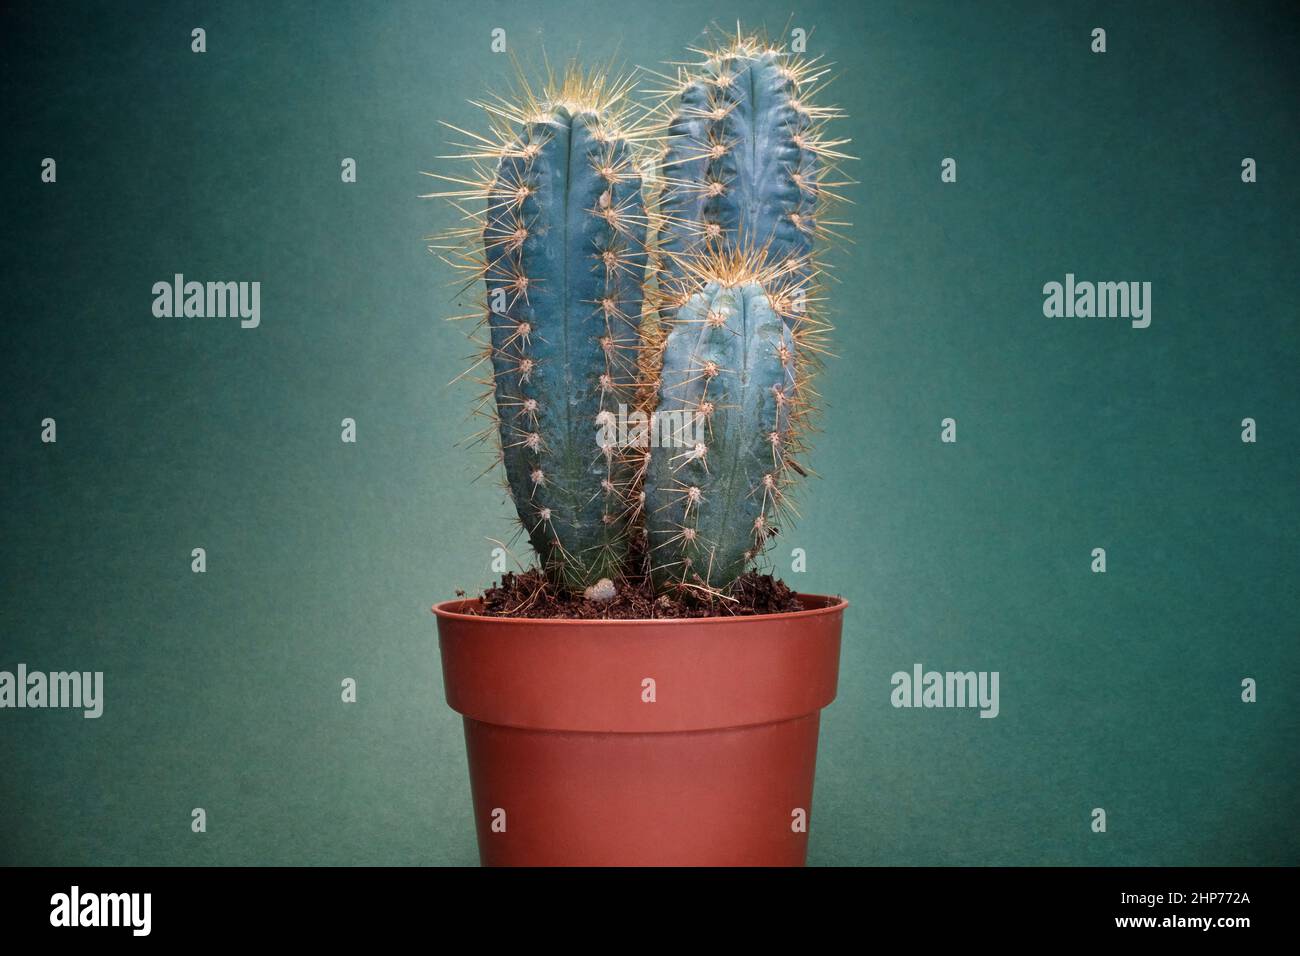 A cactus in the pot under the light in front of green background. Natural, cactus, houseplant Stock Photo